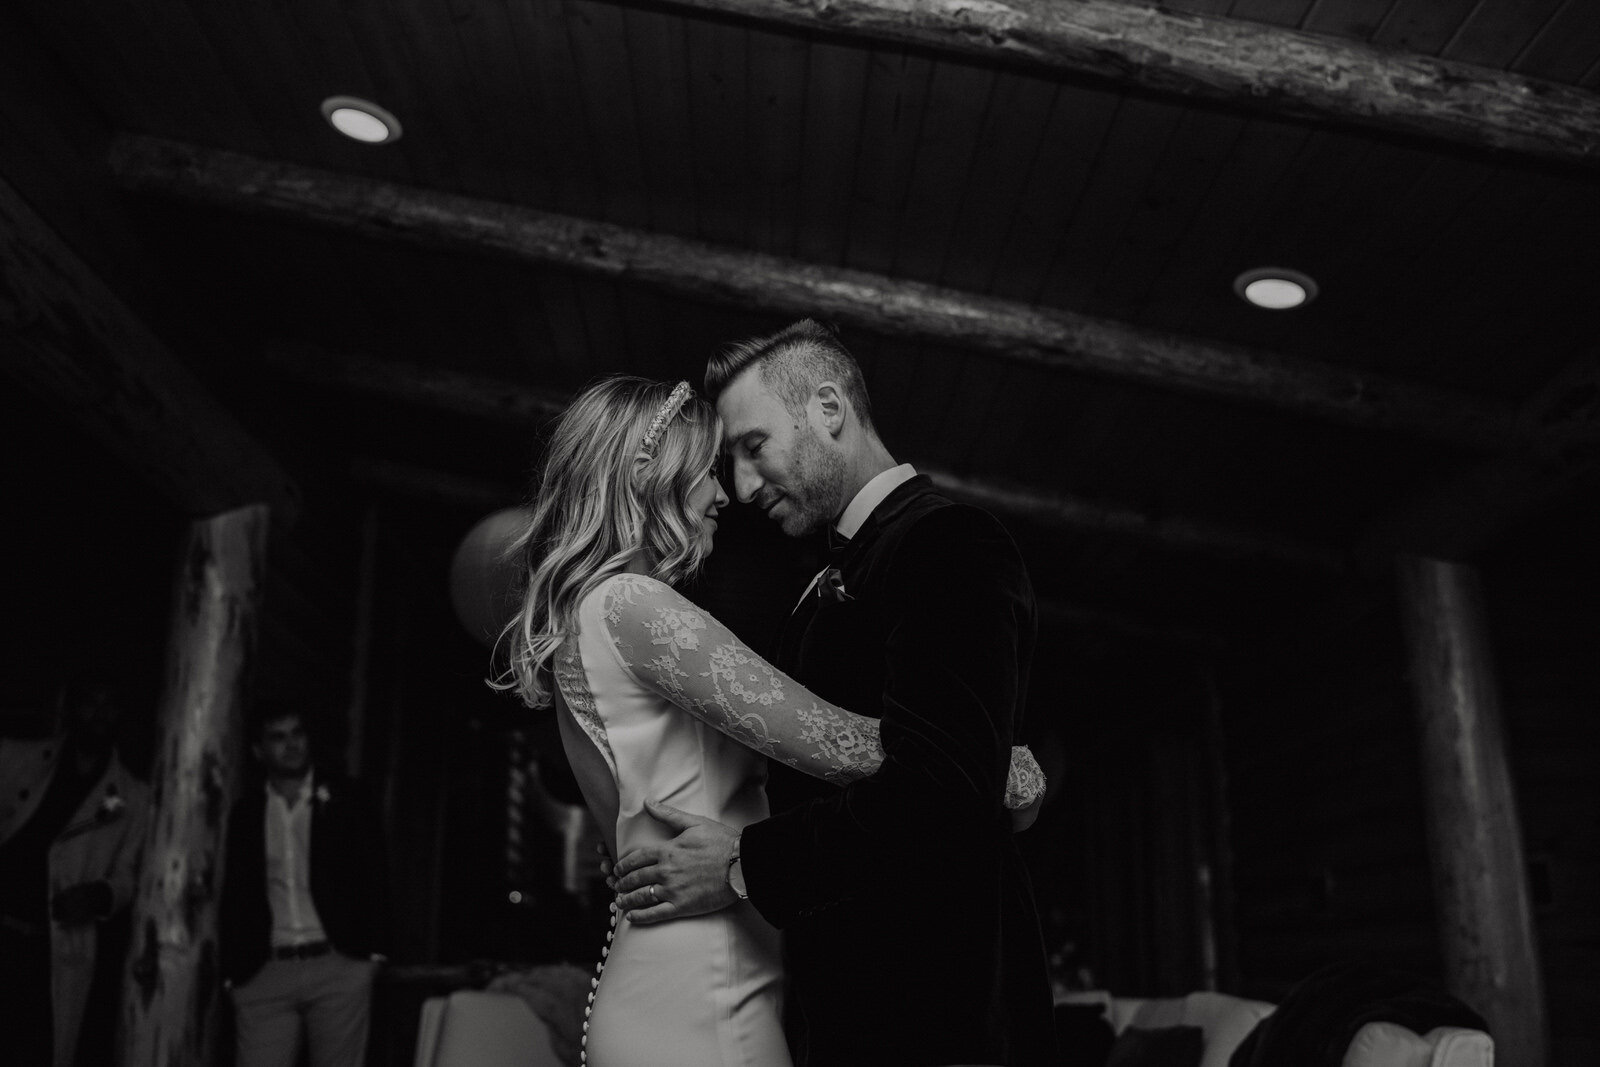 First dance at Lake Tahoe elopement | Northern California elopement | fun, nontraditional wedding photos by California Elopement Photographer Planner Kept Record | www.keptrecord.com